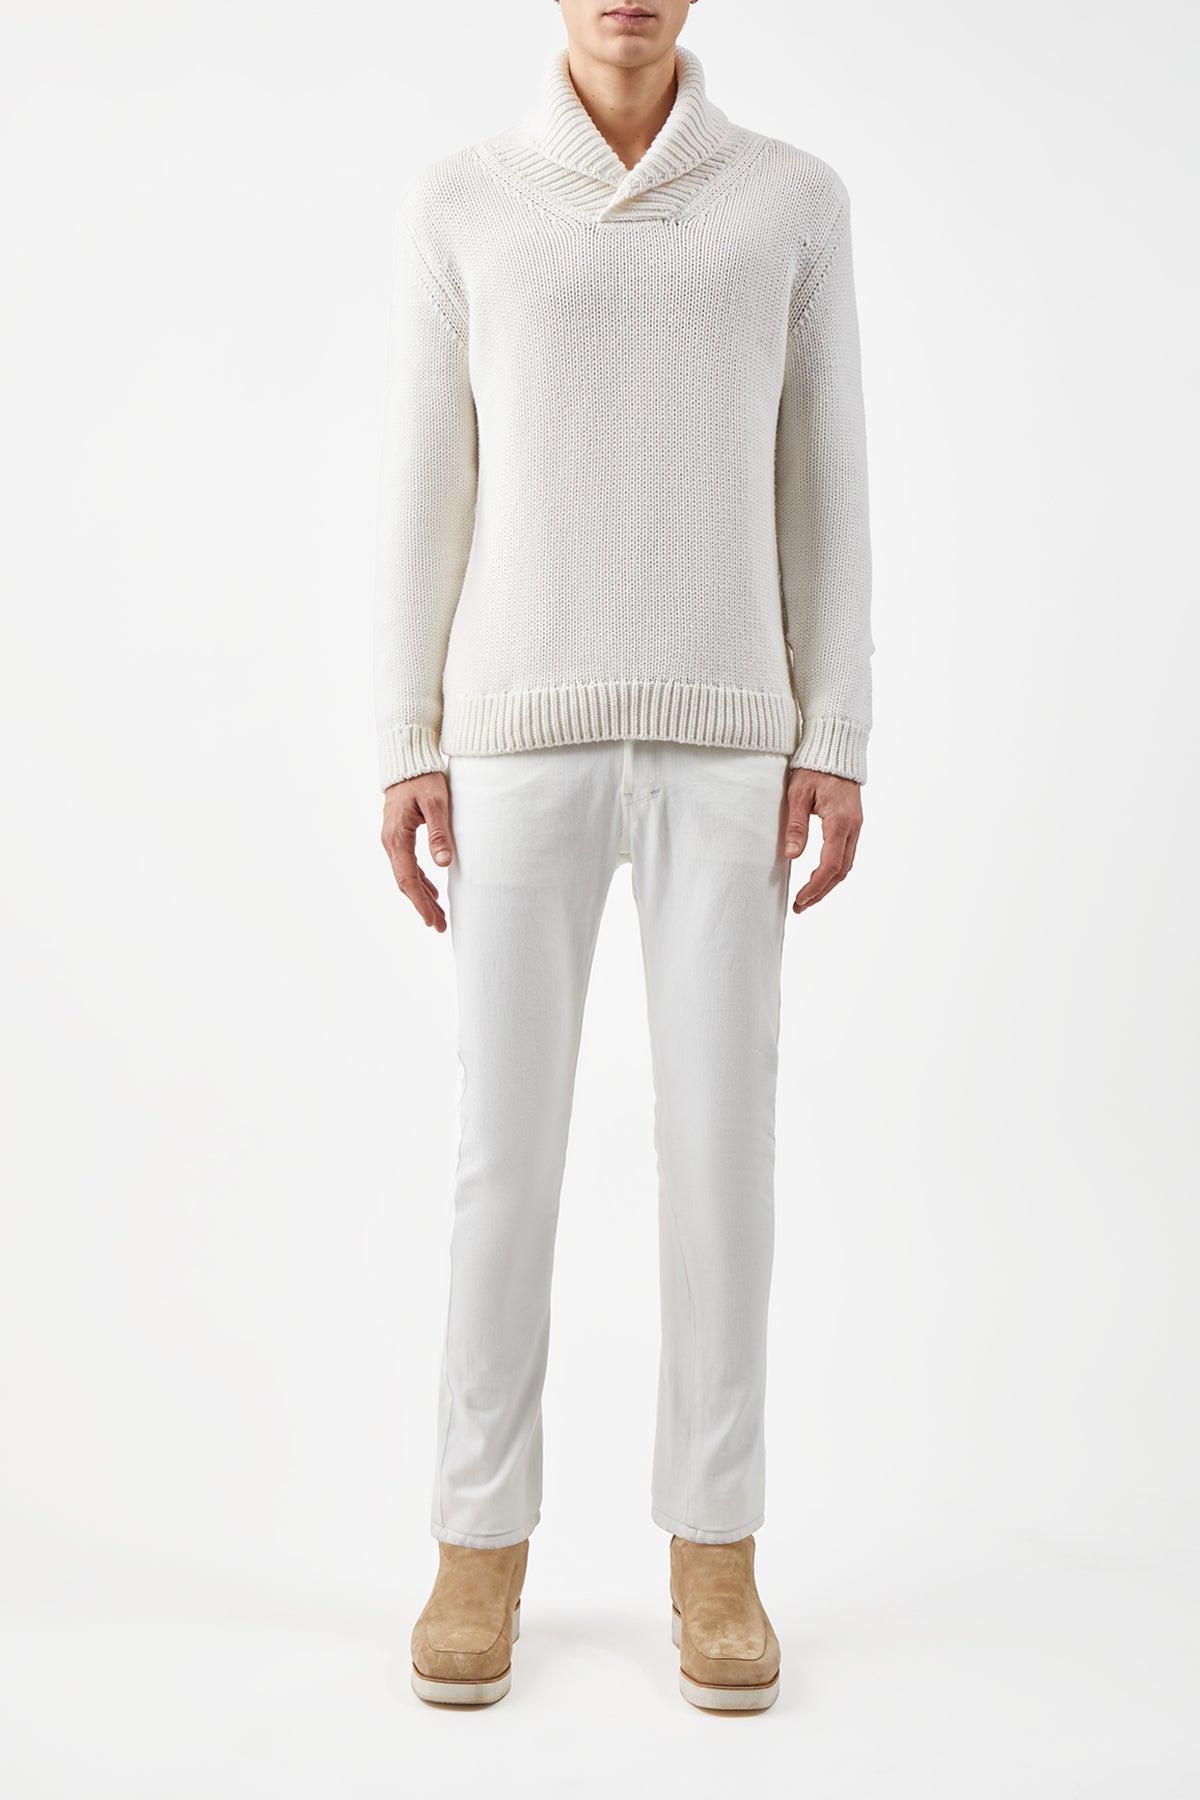 Sal Knit Sweater in Ivory Cashmere - 2